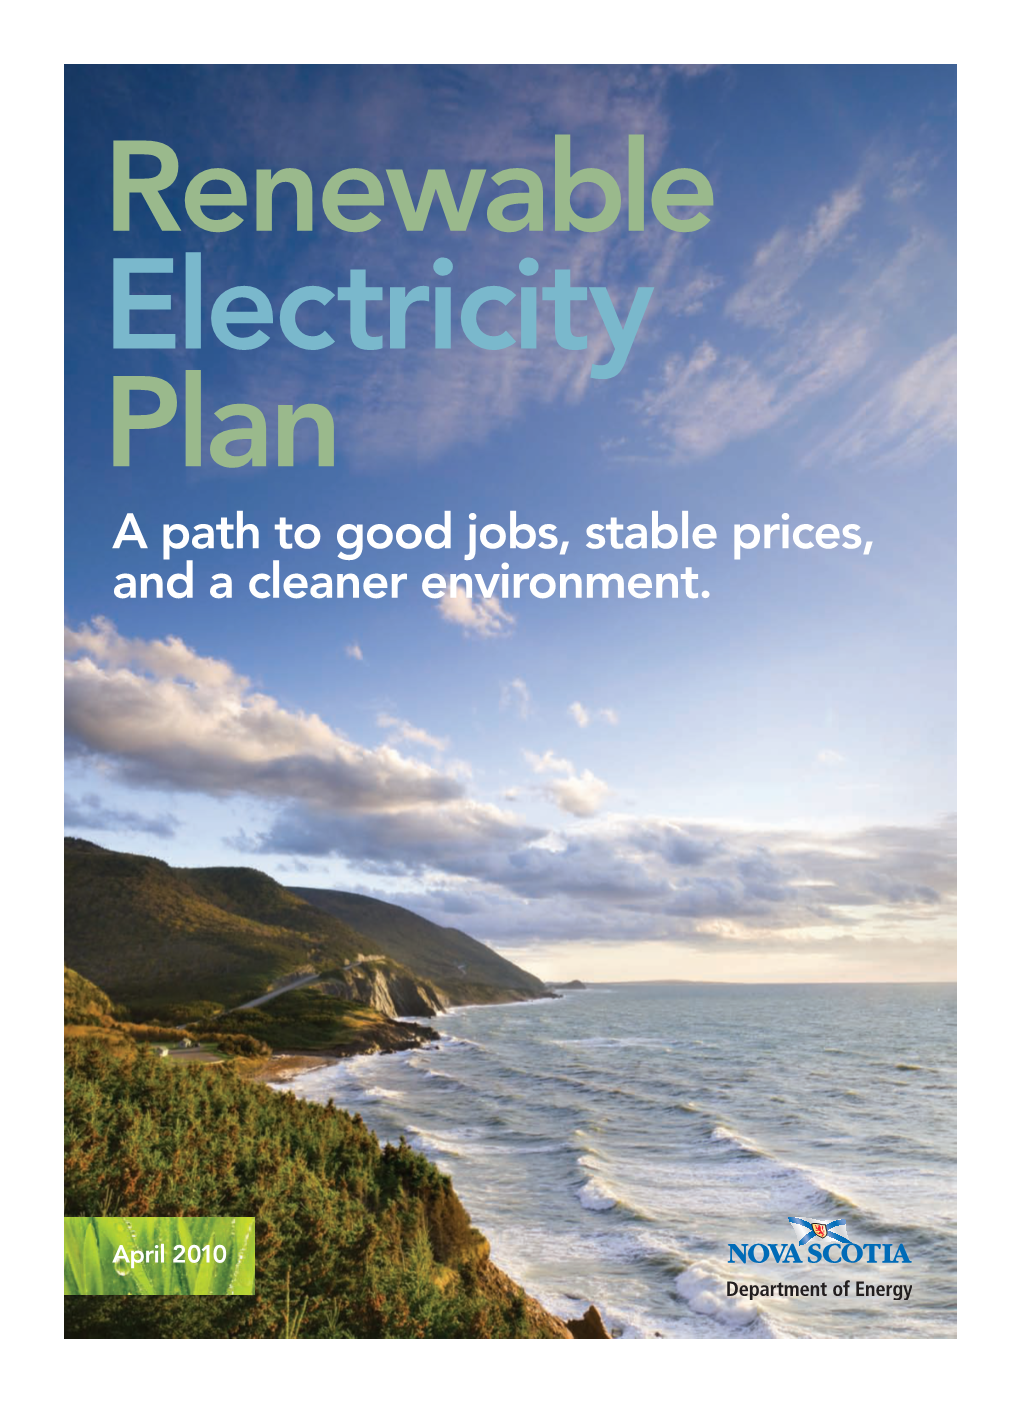 Renewable Electricity Plan a Path to Good Jobs, Stable Prices, and a Cleaner Environment